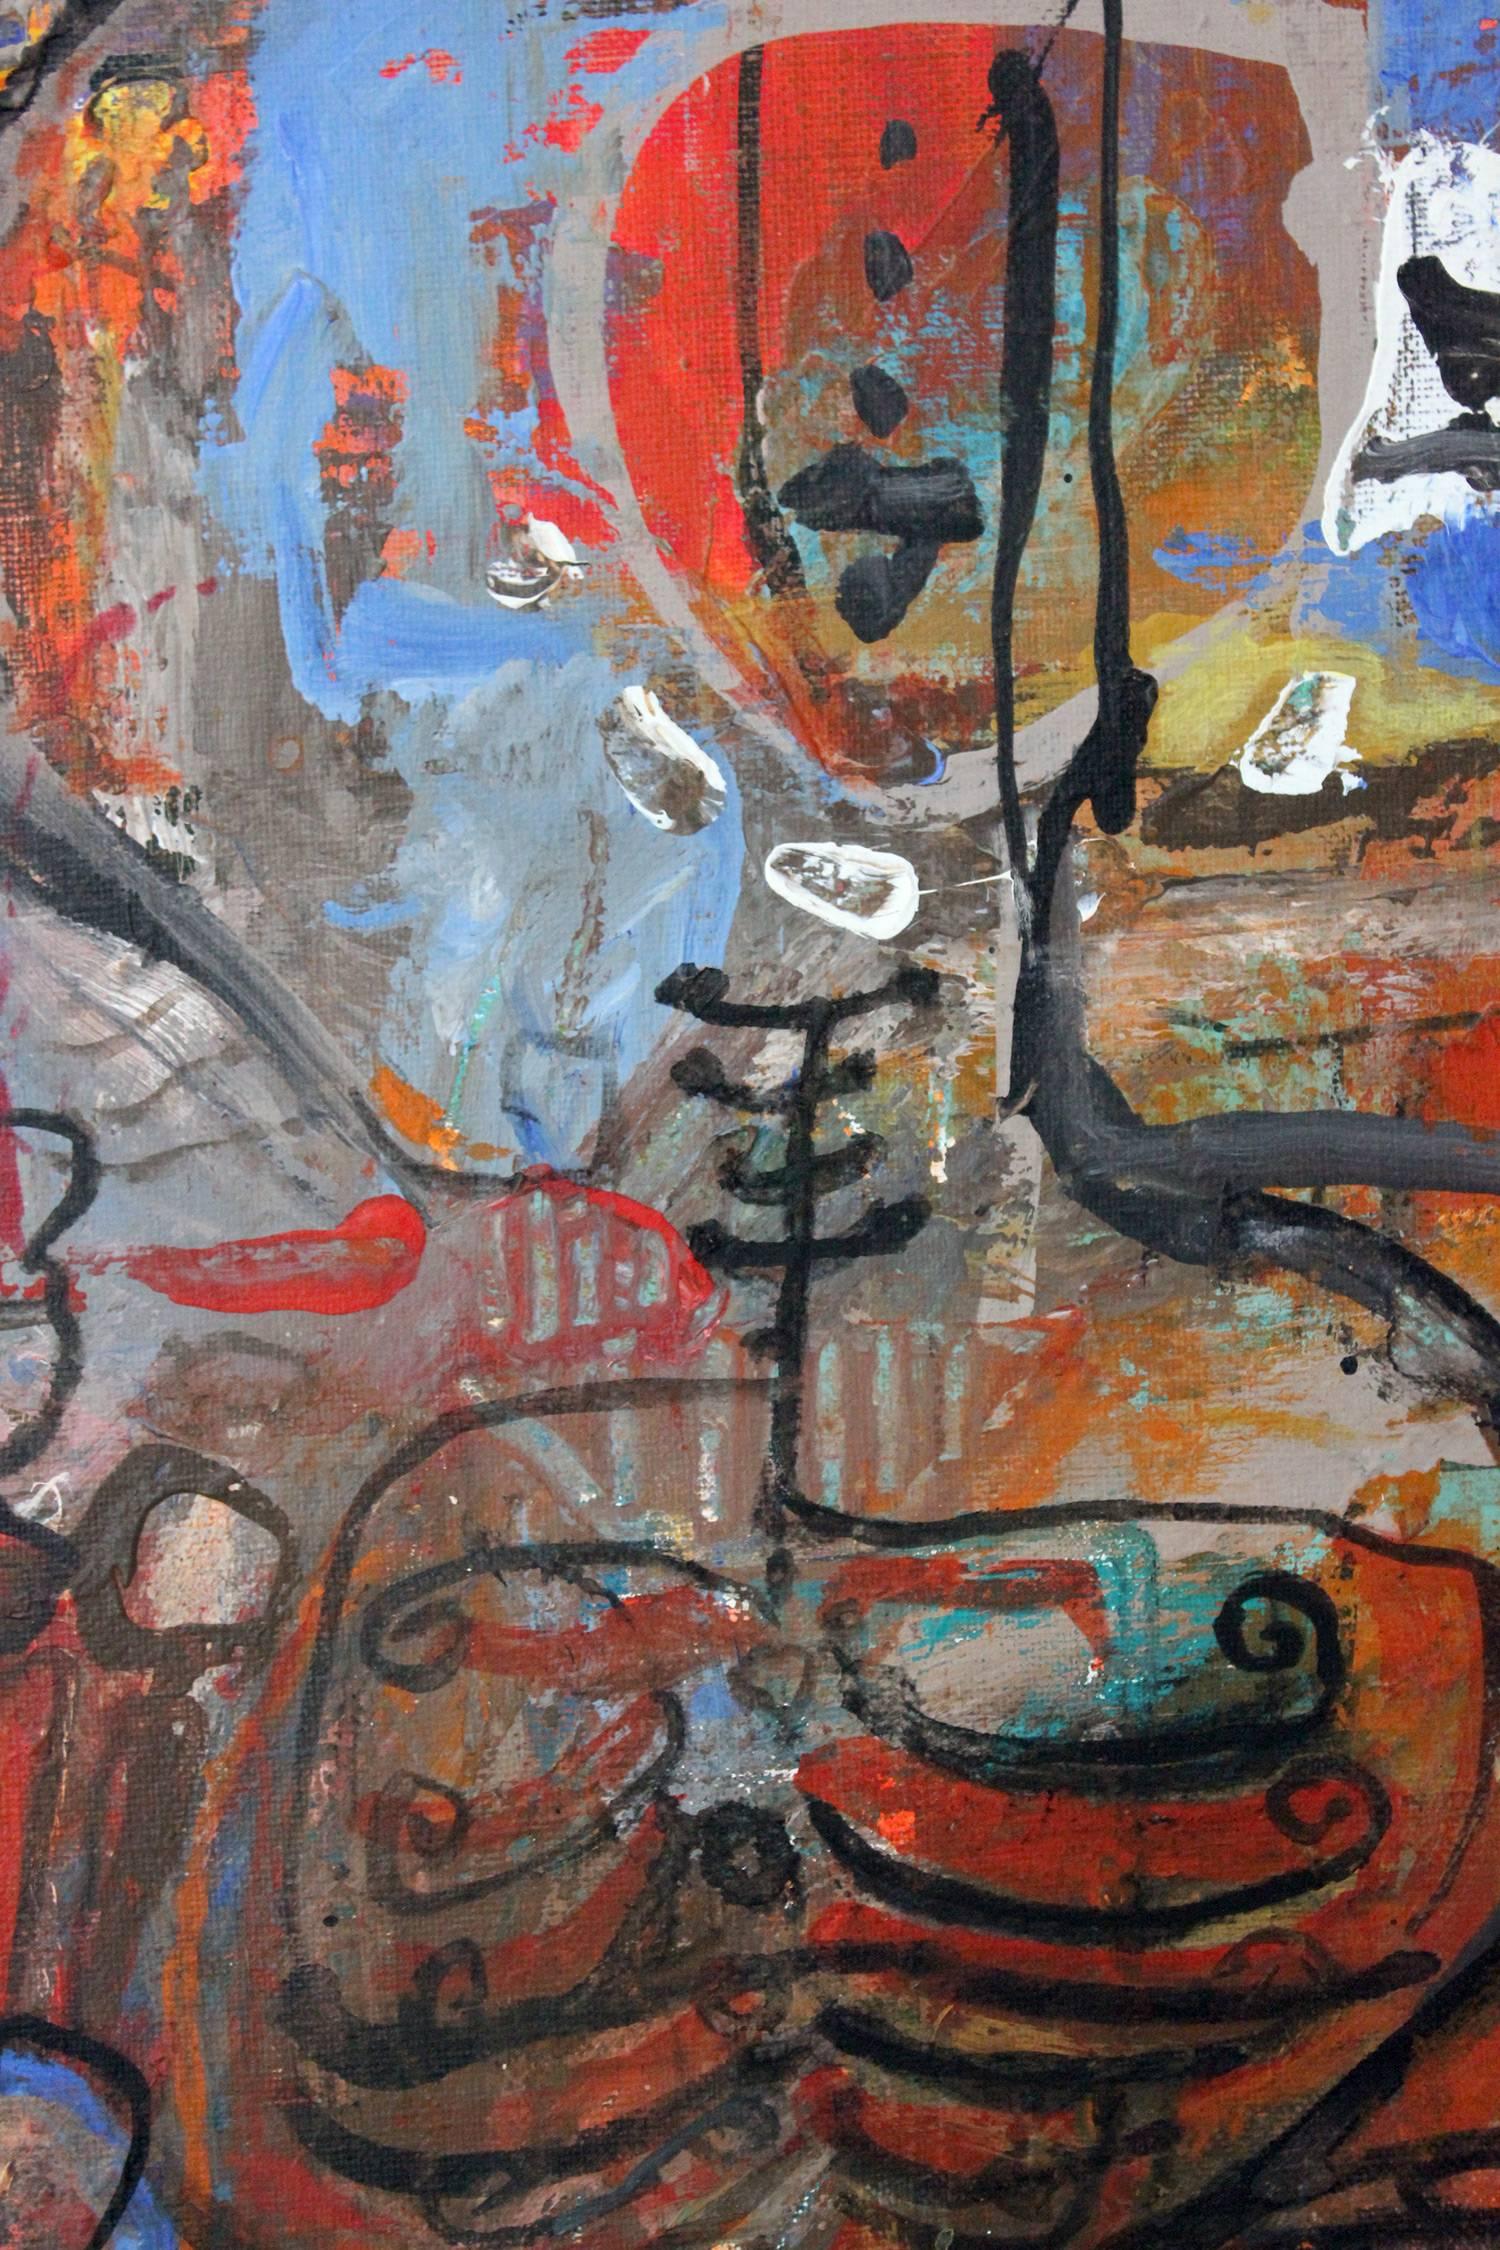 Non Objective Composition  - Abstract Expressionist Painting by Suki Maguire